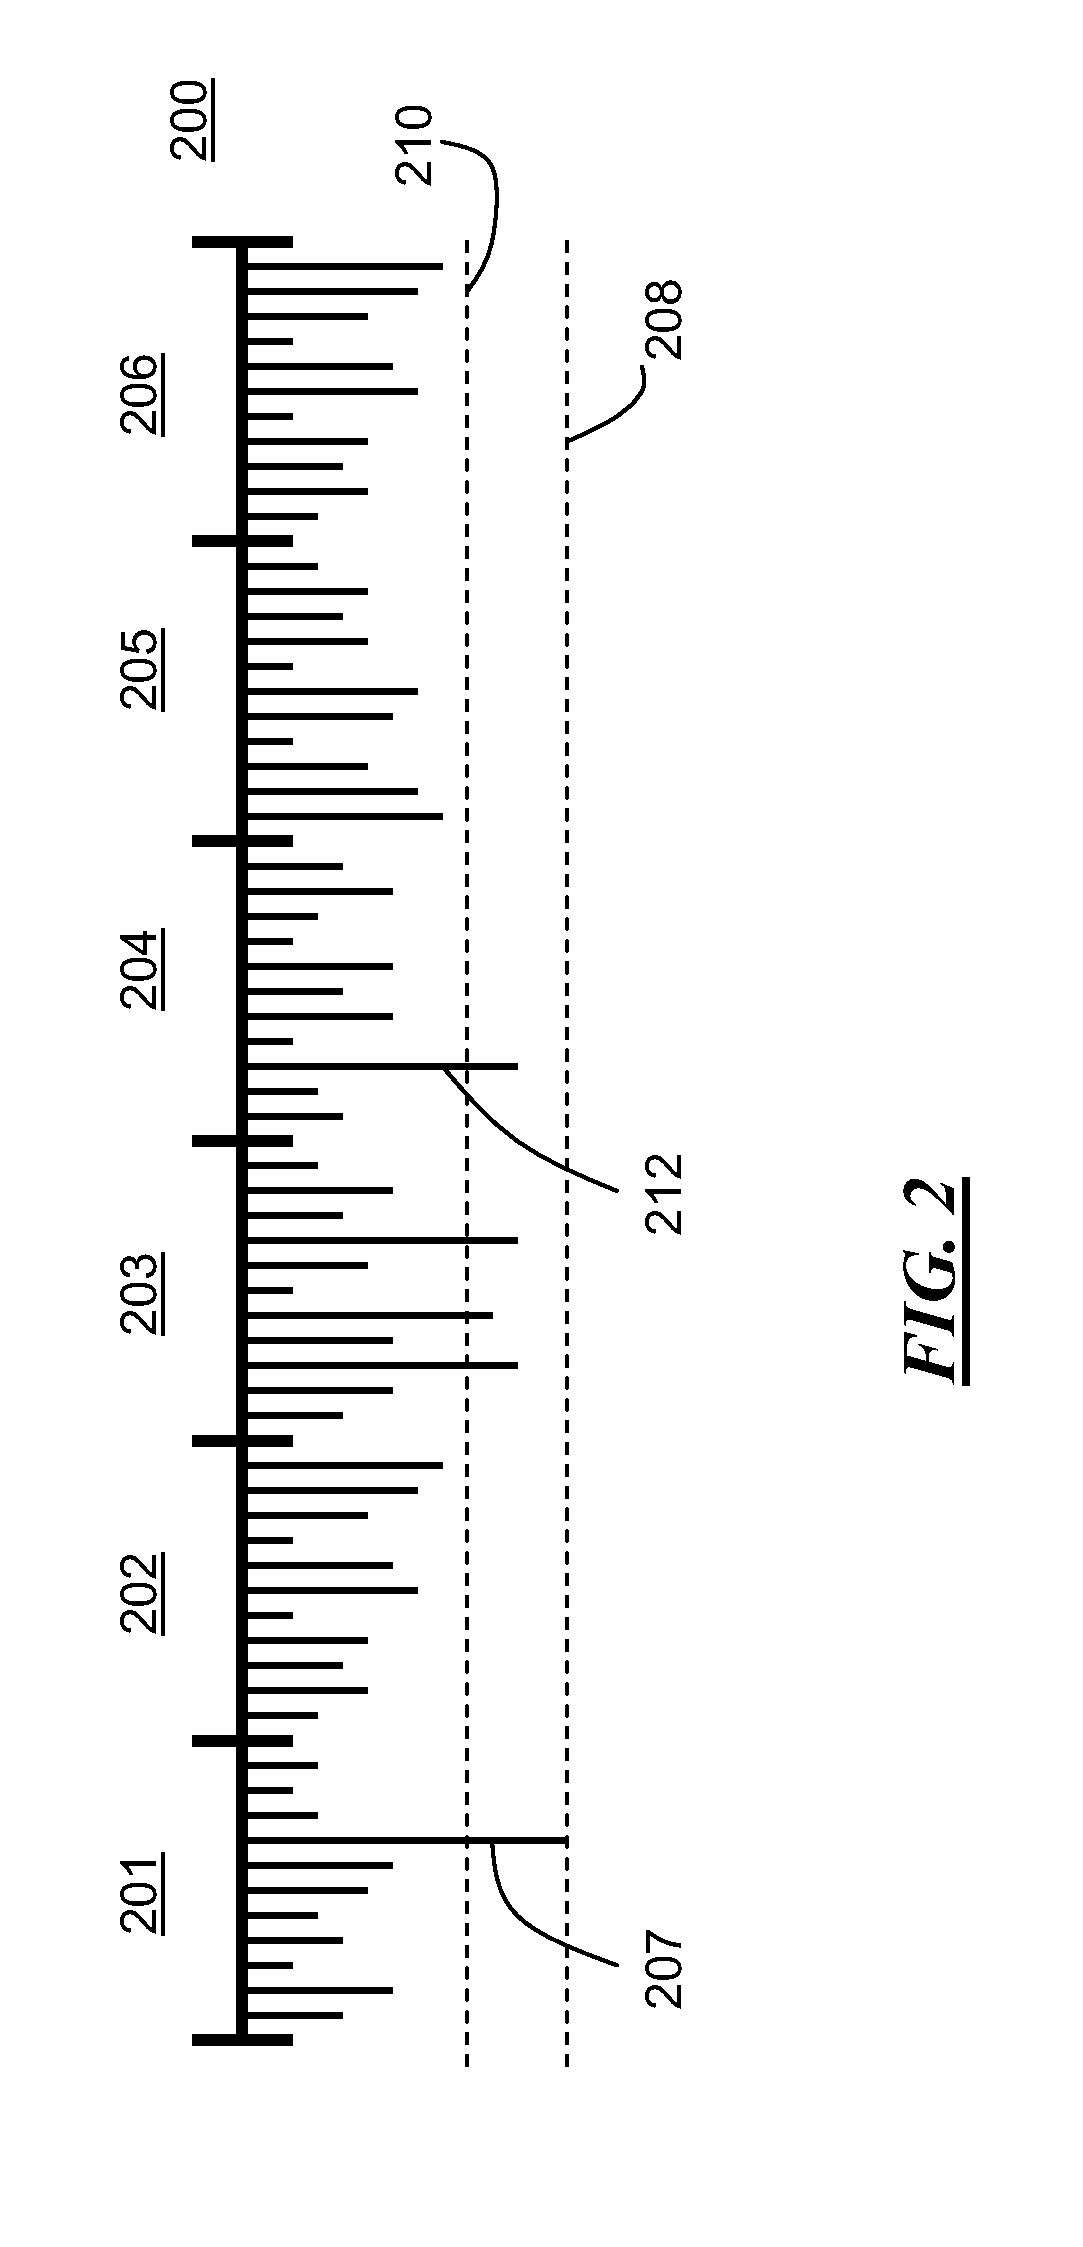 Method and apparatus for selecting a radio channel for transmitting an audio signal to a radio local receiver